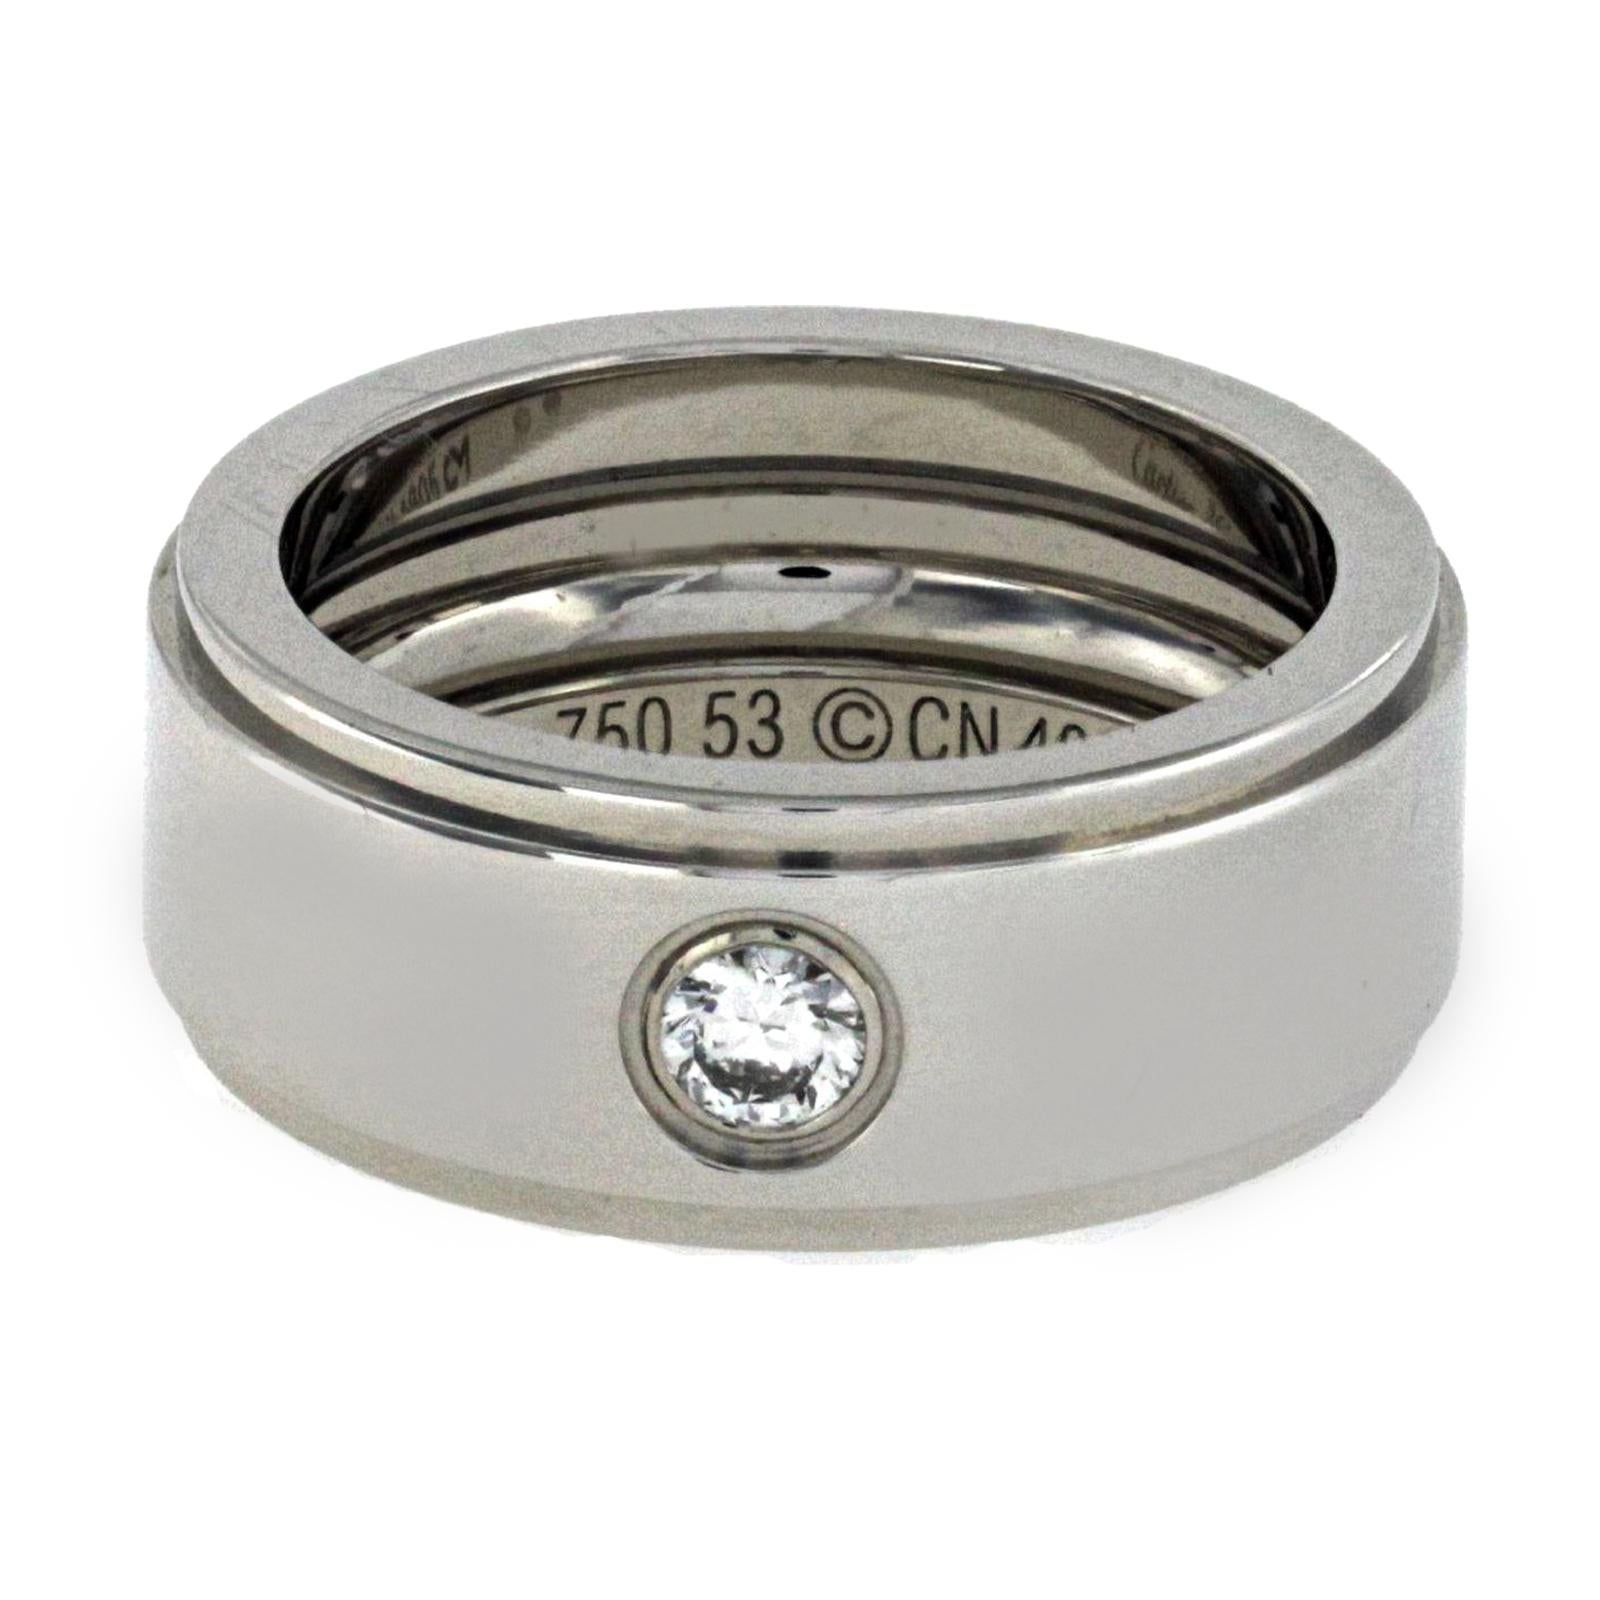 100% Authentic, 100% Customer Satisfaction

Top: 8 mm

Band Width: 8 mm

Metal: 18K White Gold 

Size: 6.5

Hallmarks: Cartier  750 Italy 

Total Weight:  13.1 Grams

Stone Type: 0.15 CT VVS E Diamond

Condition: Pre Owned

Estimated Retail Price: